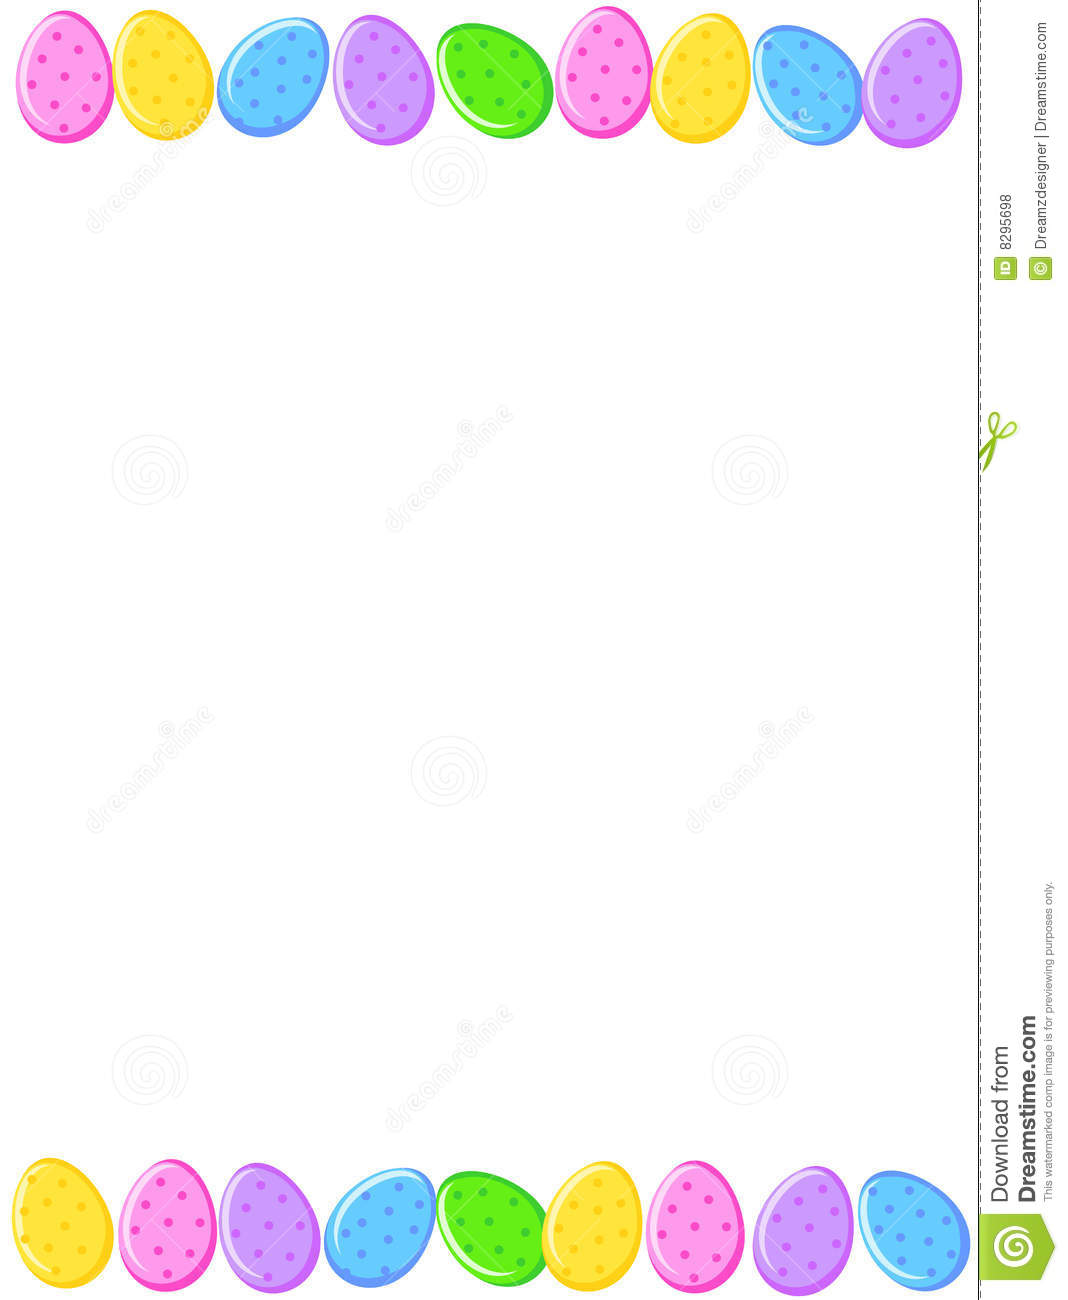 Free borders and frames. Boarder clipart easter egg